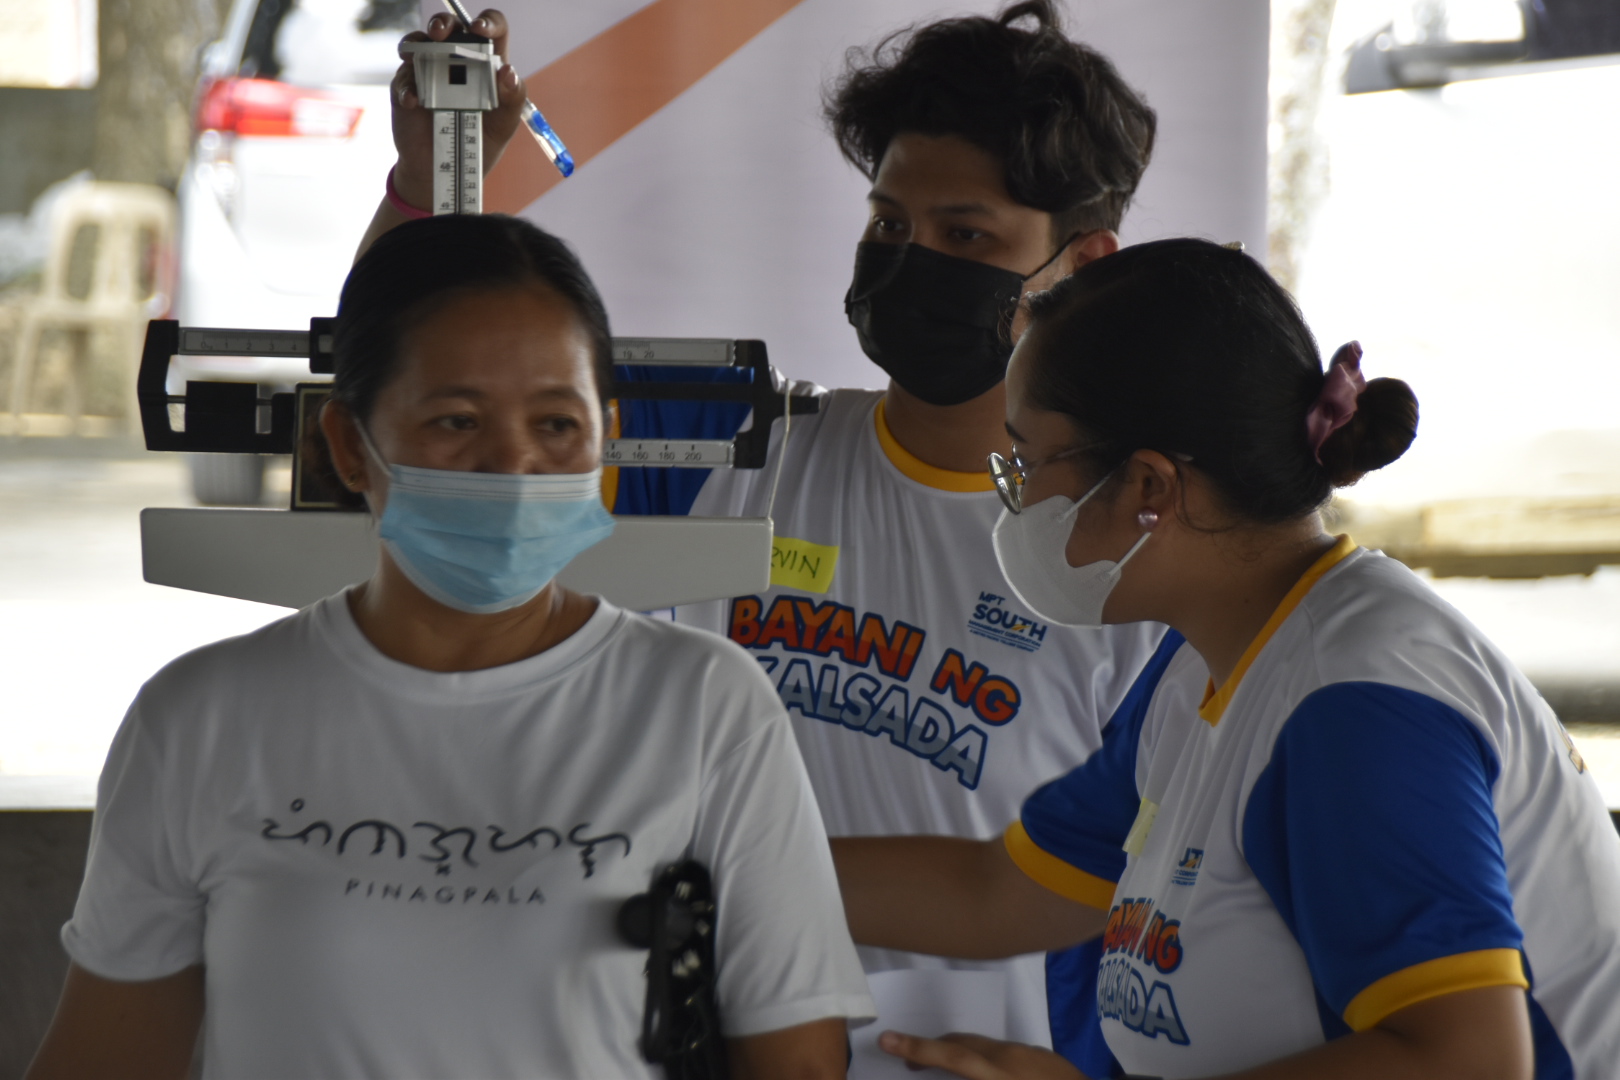 Medical Mission of MPT South